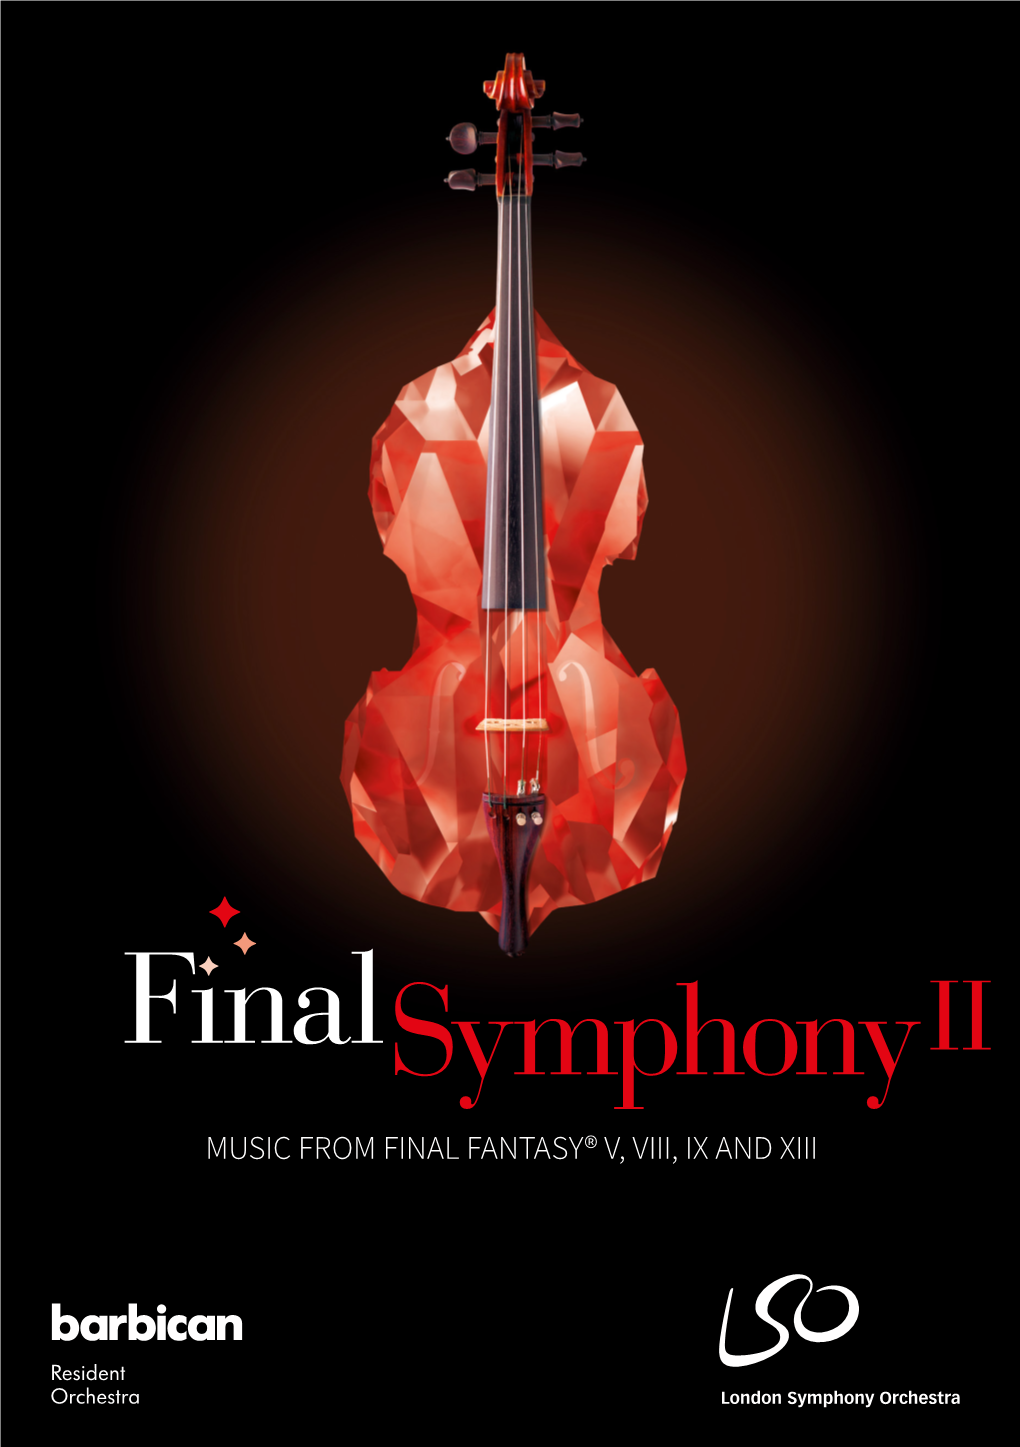 Music from Final Fantasy® V, Viii, Ix and Xiii